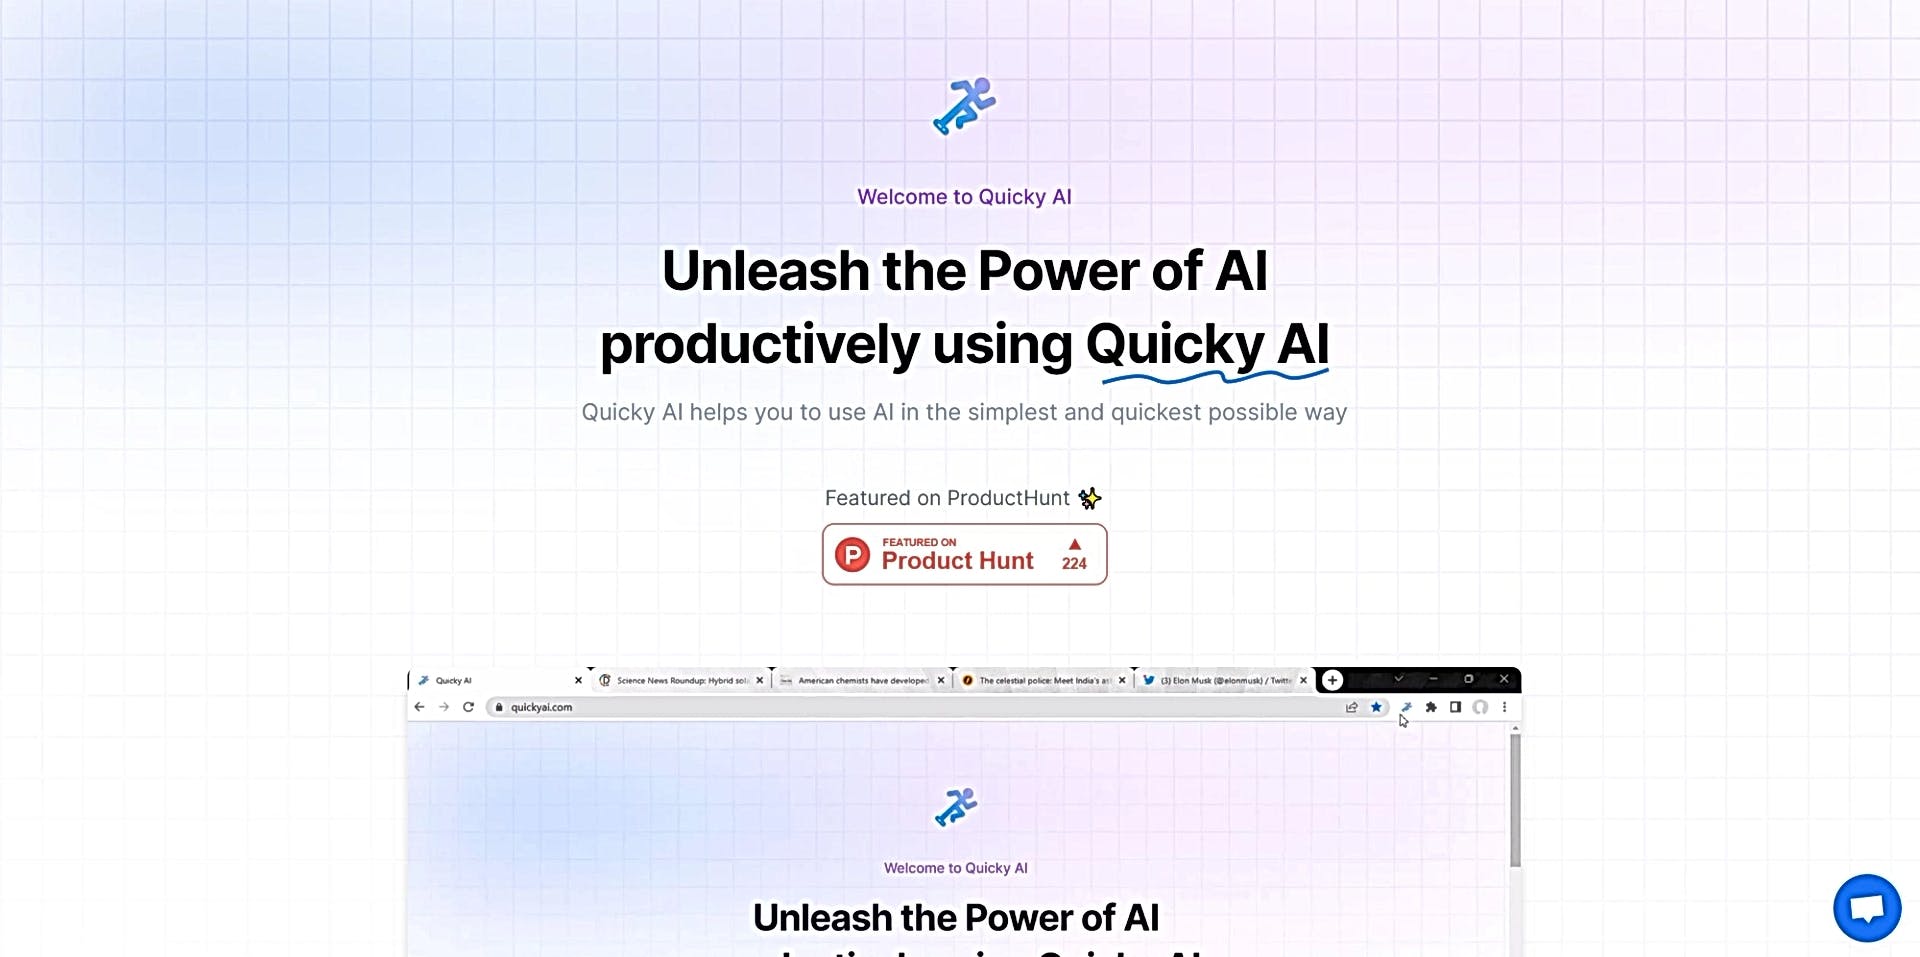 Quicky AI featured